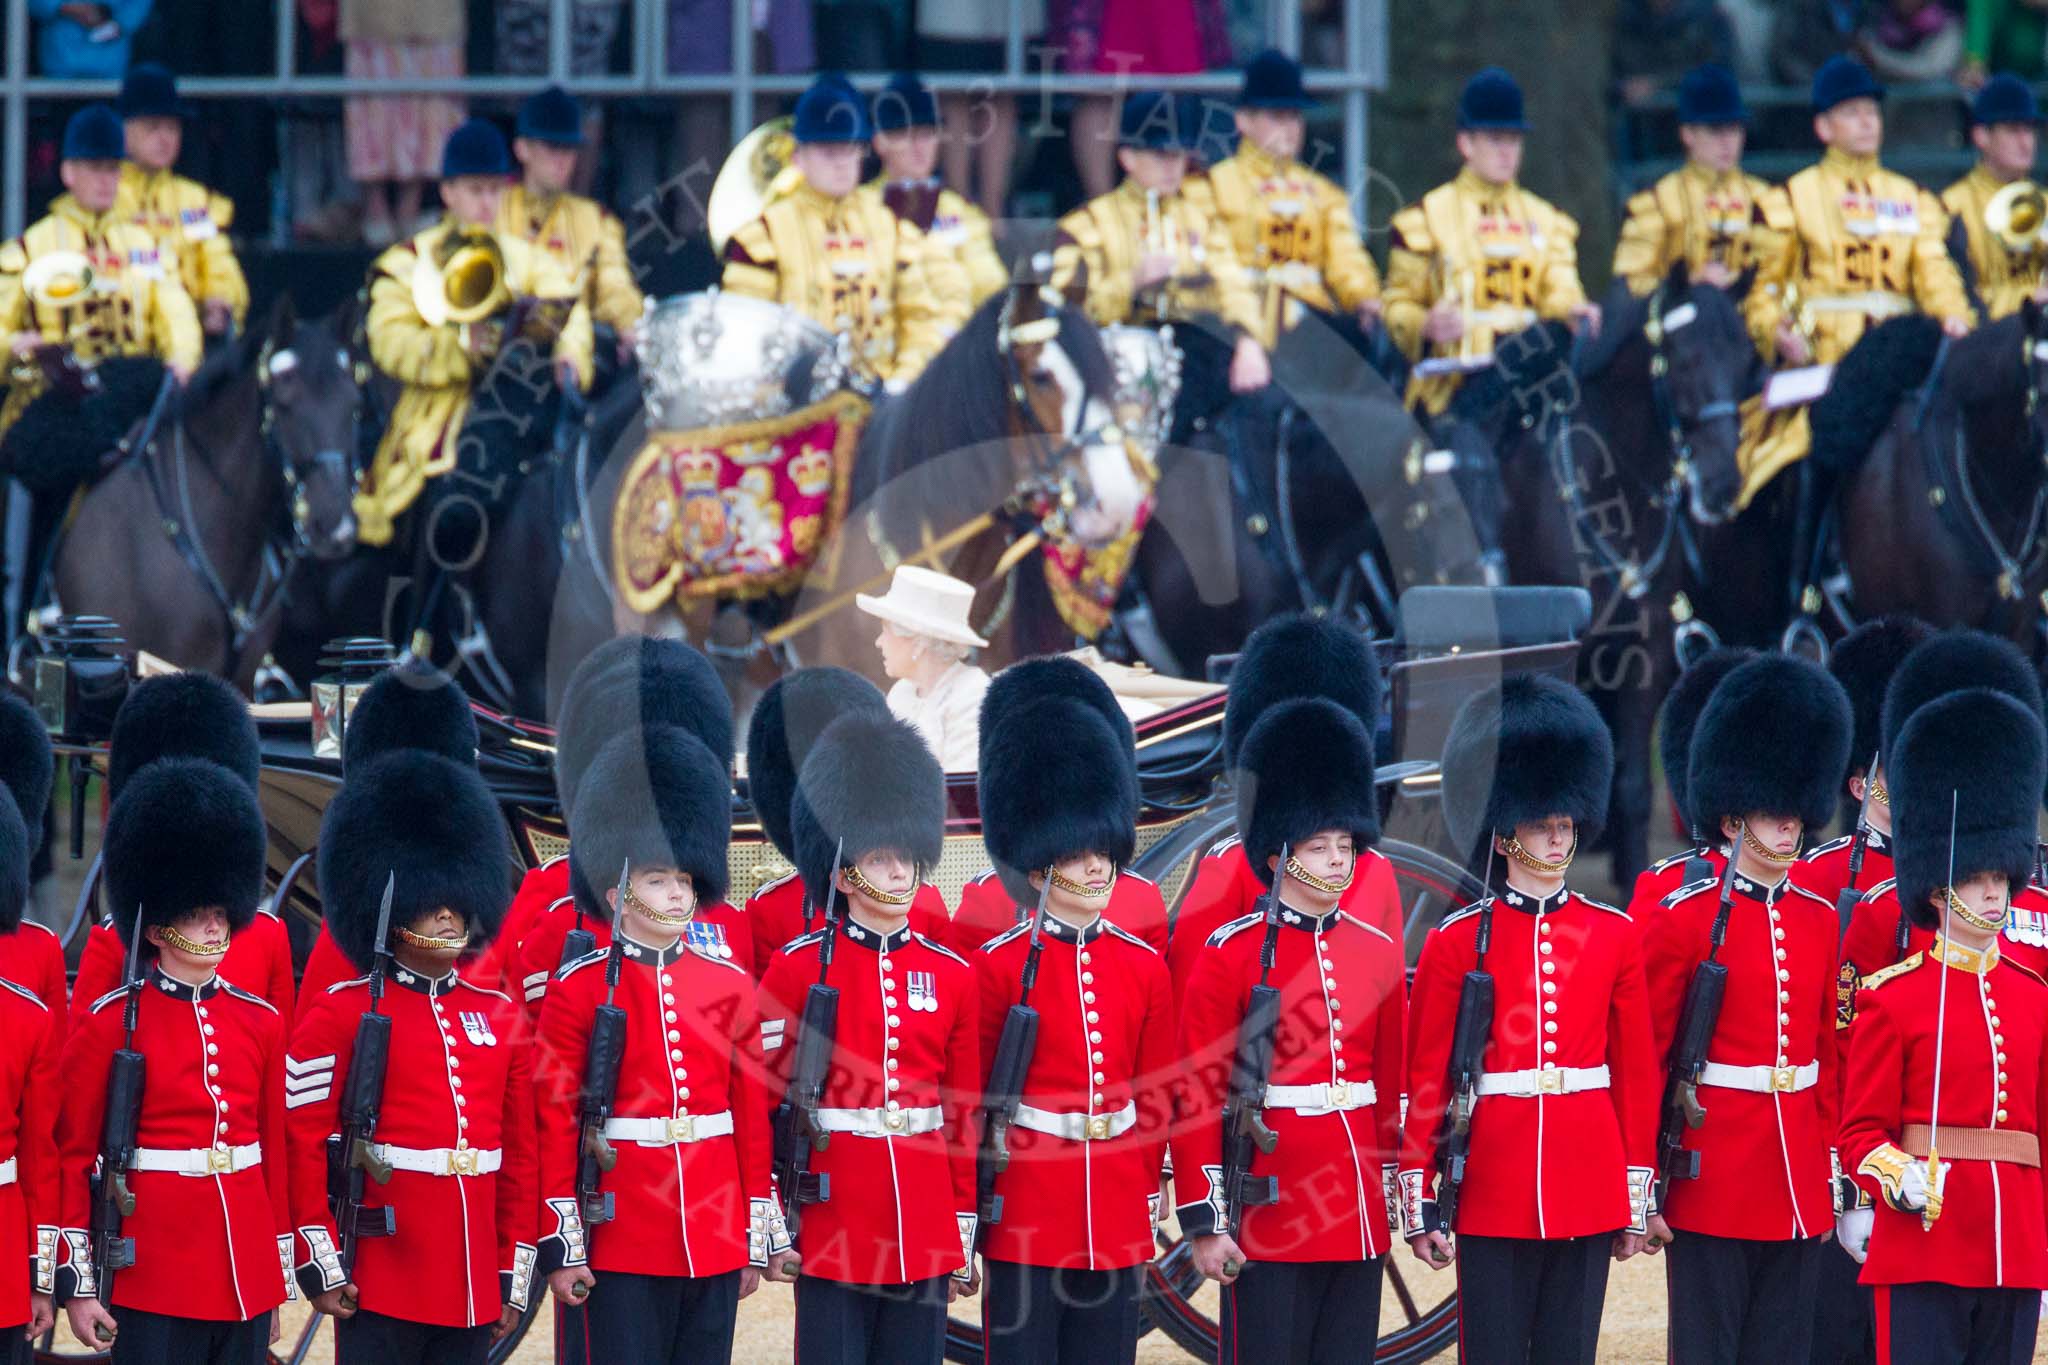 Trooping the Colour 2015. Image #284, 13 June 2015 11:03 Horse Guards Parade, London, UK